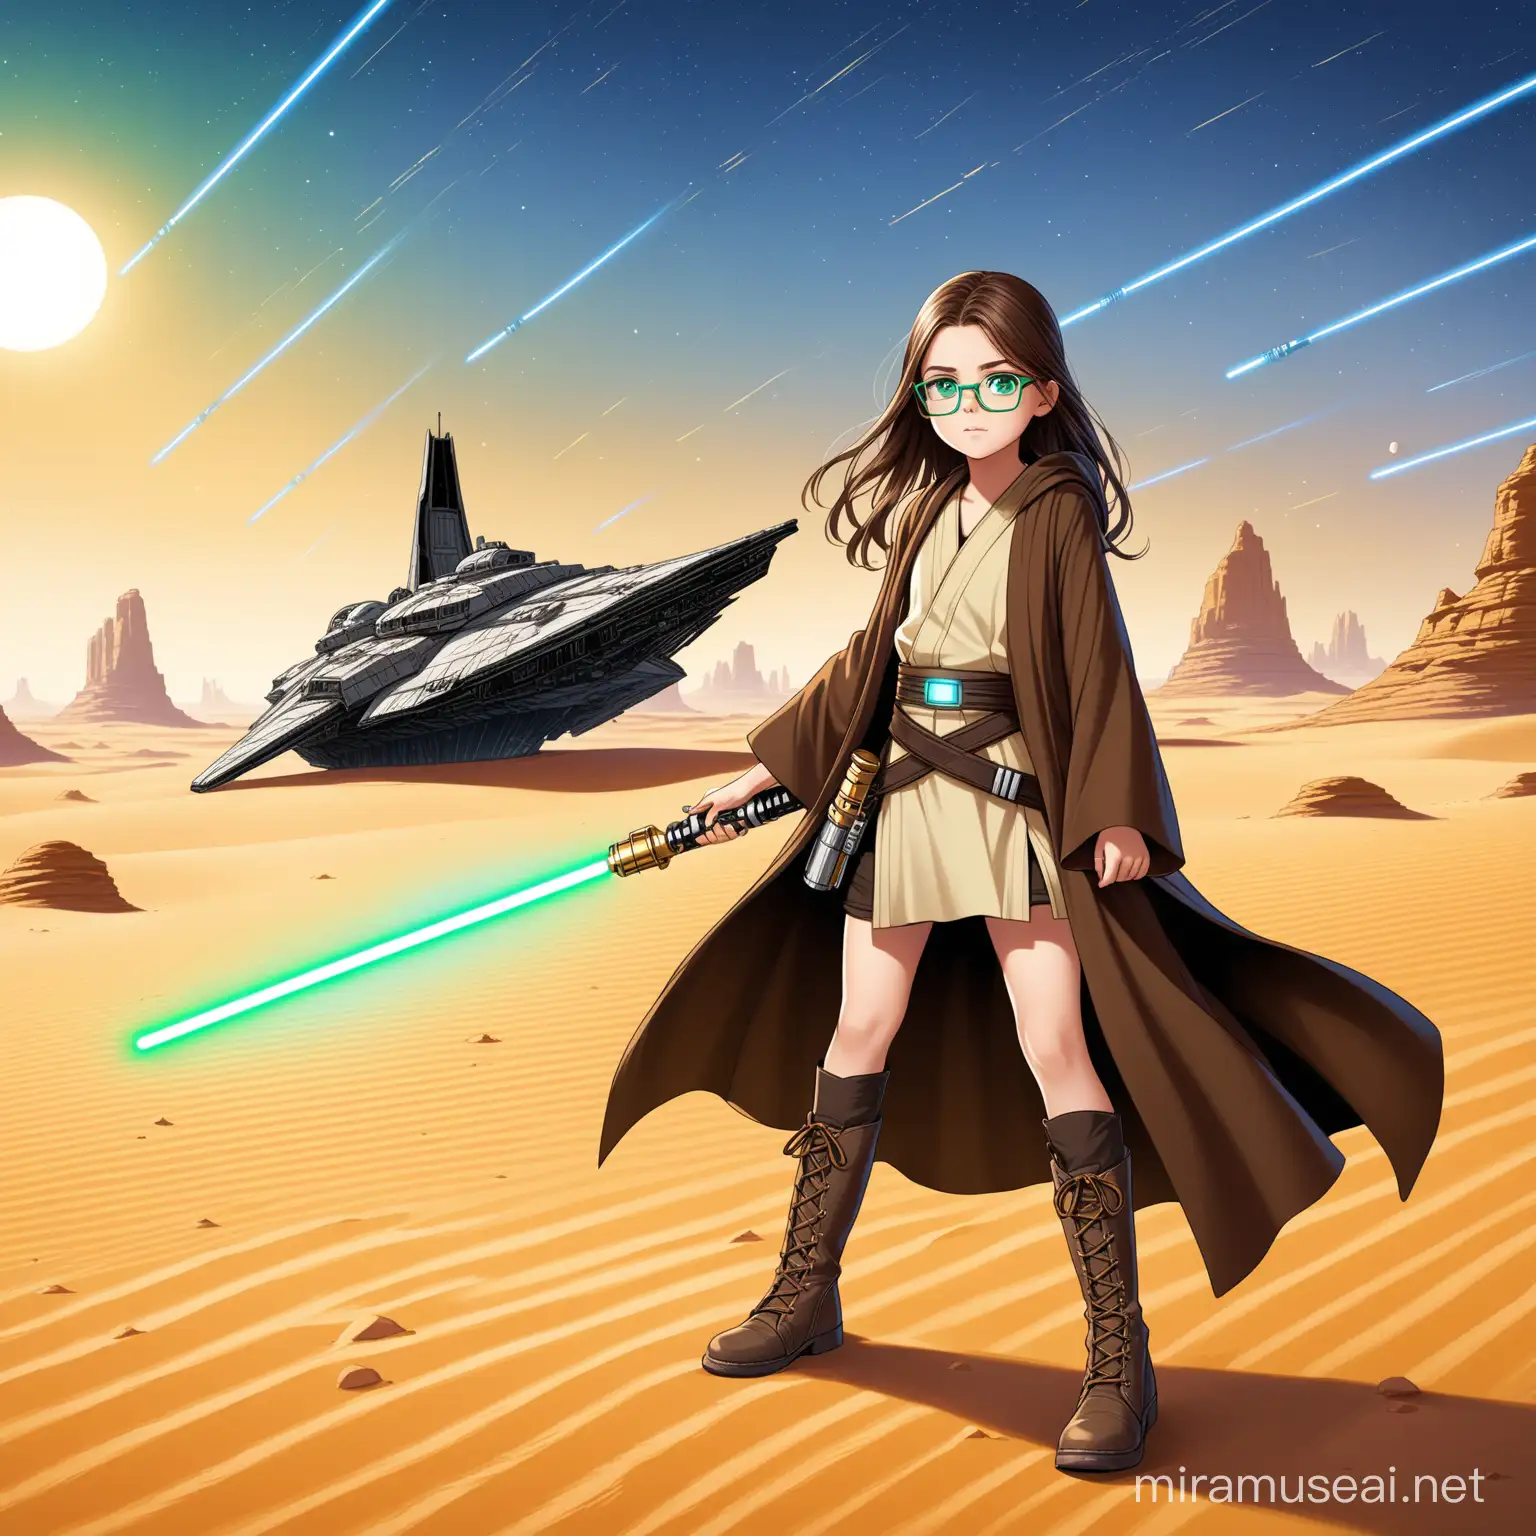 Young Jedi Girl with Gold Lightsaber in Desert Landscape